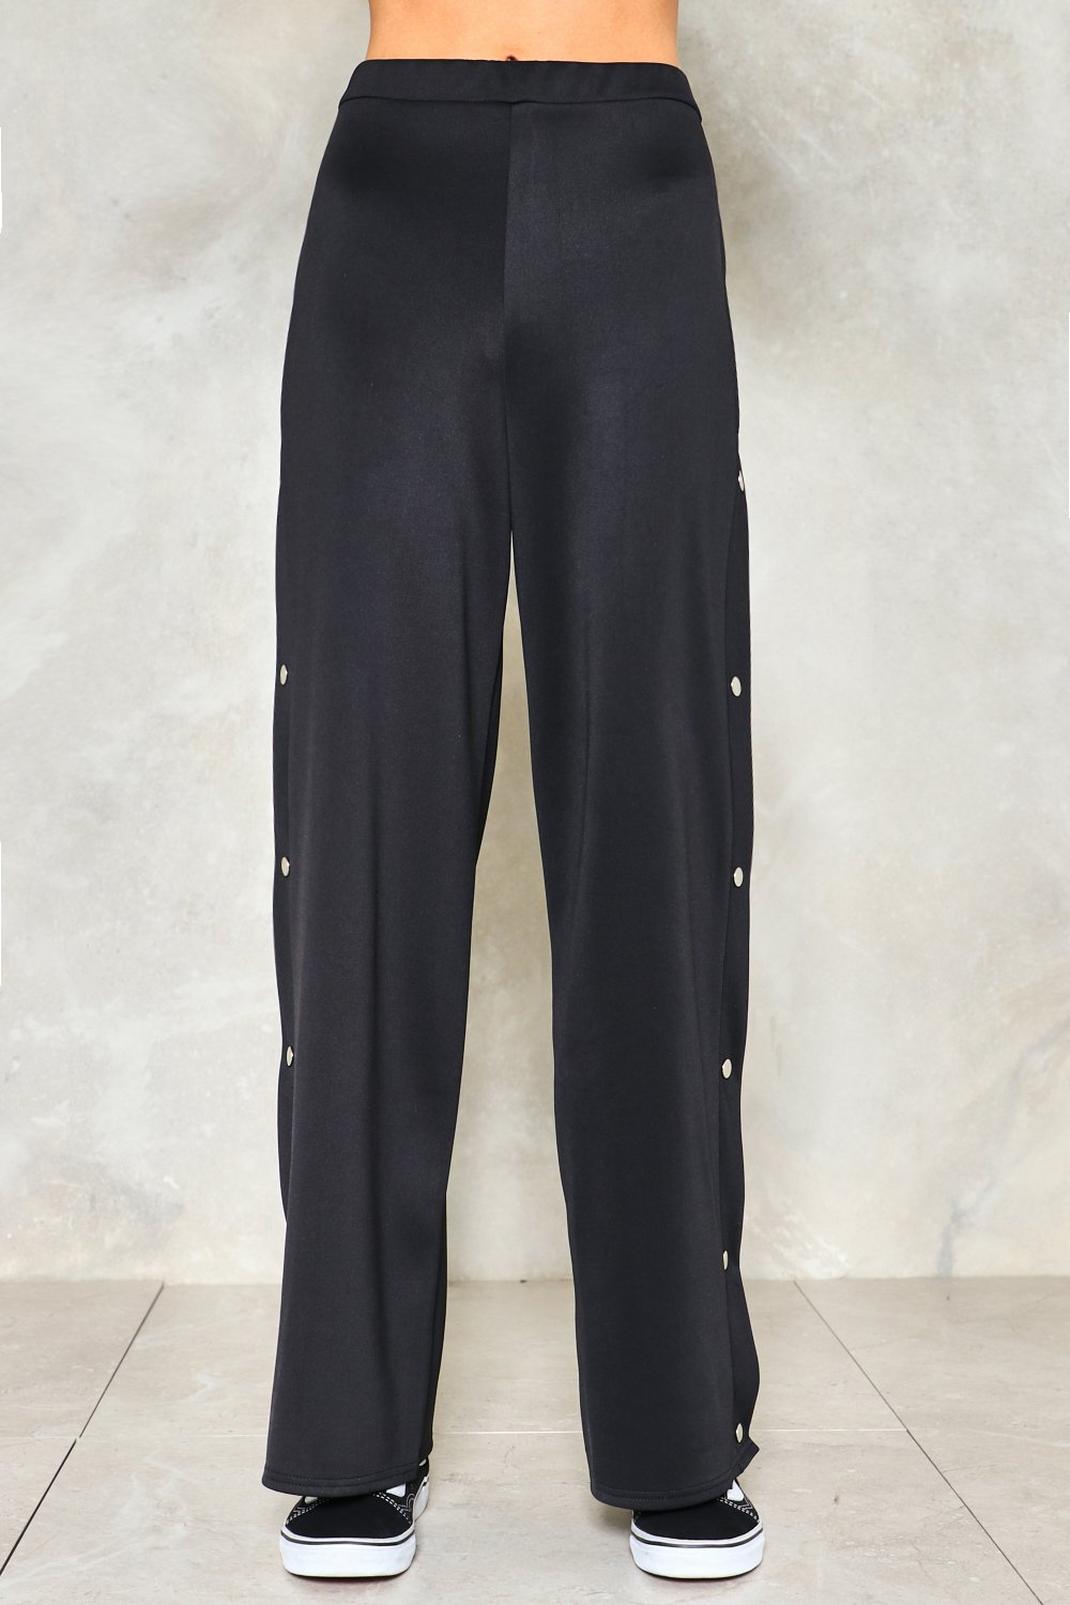 Snap Out of It Tear-Away Pants | Nasty Gal